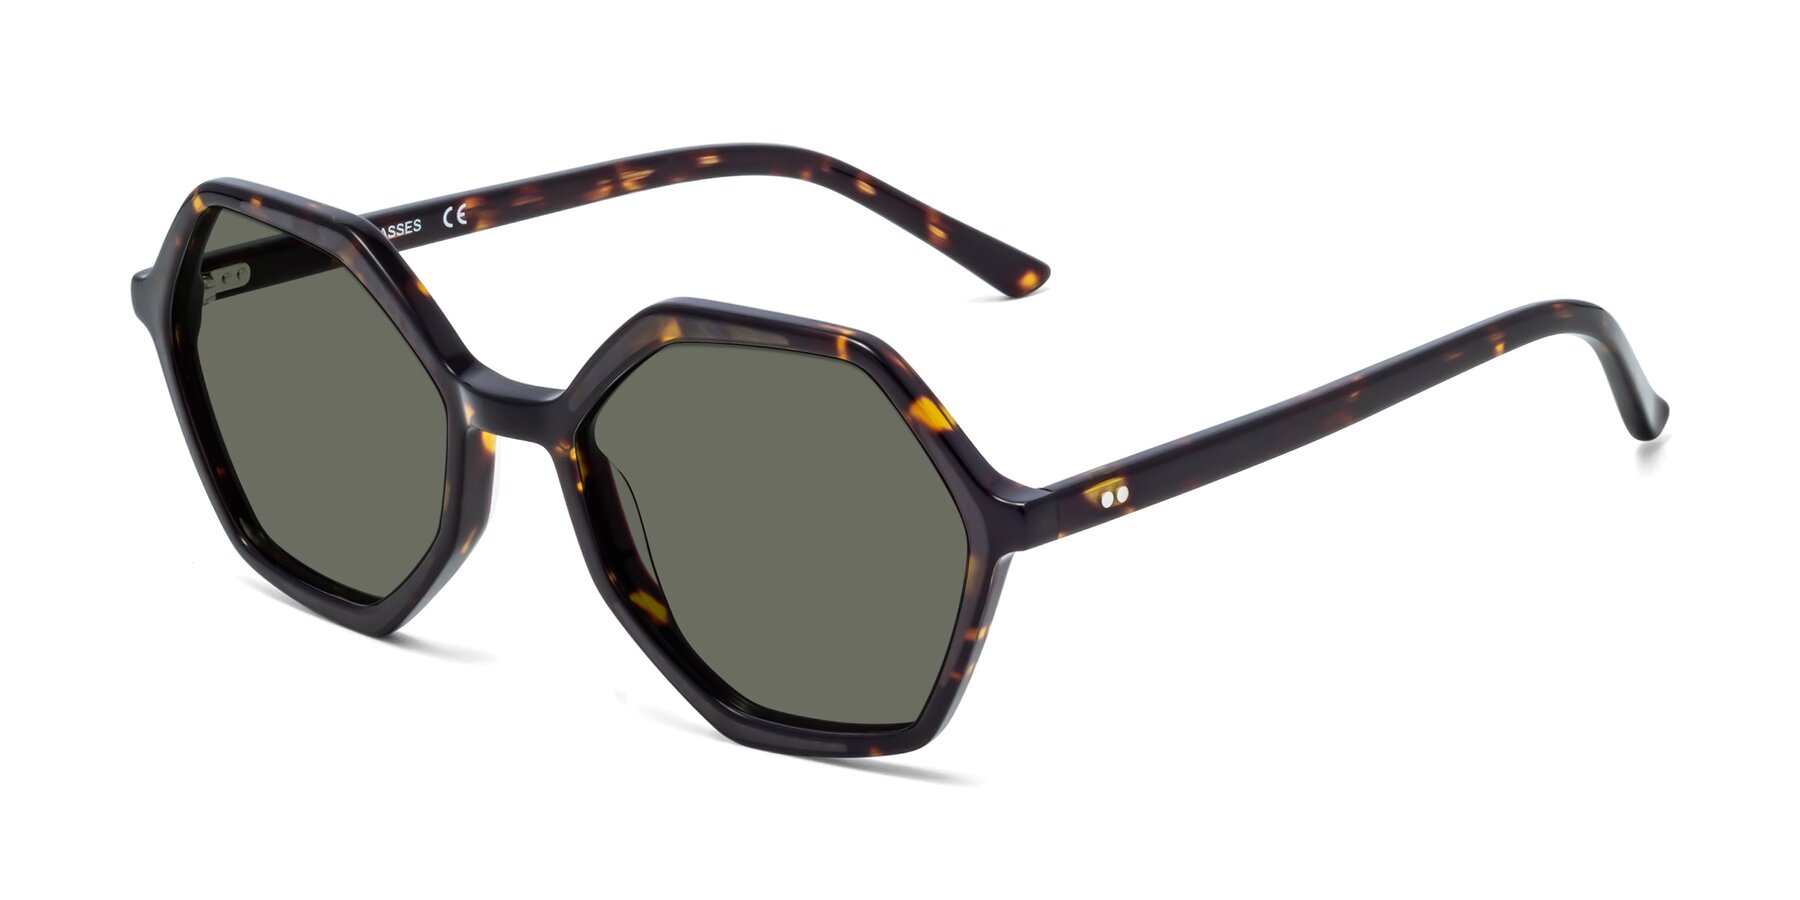 Angle of 1489 in Tortoise with Gray Polarized Lenses